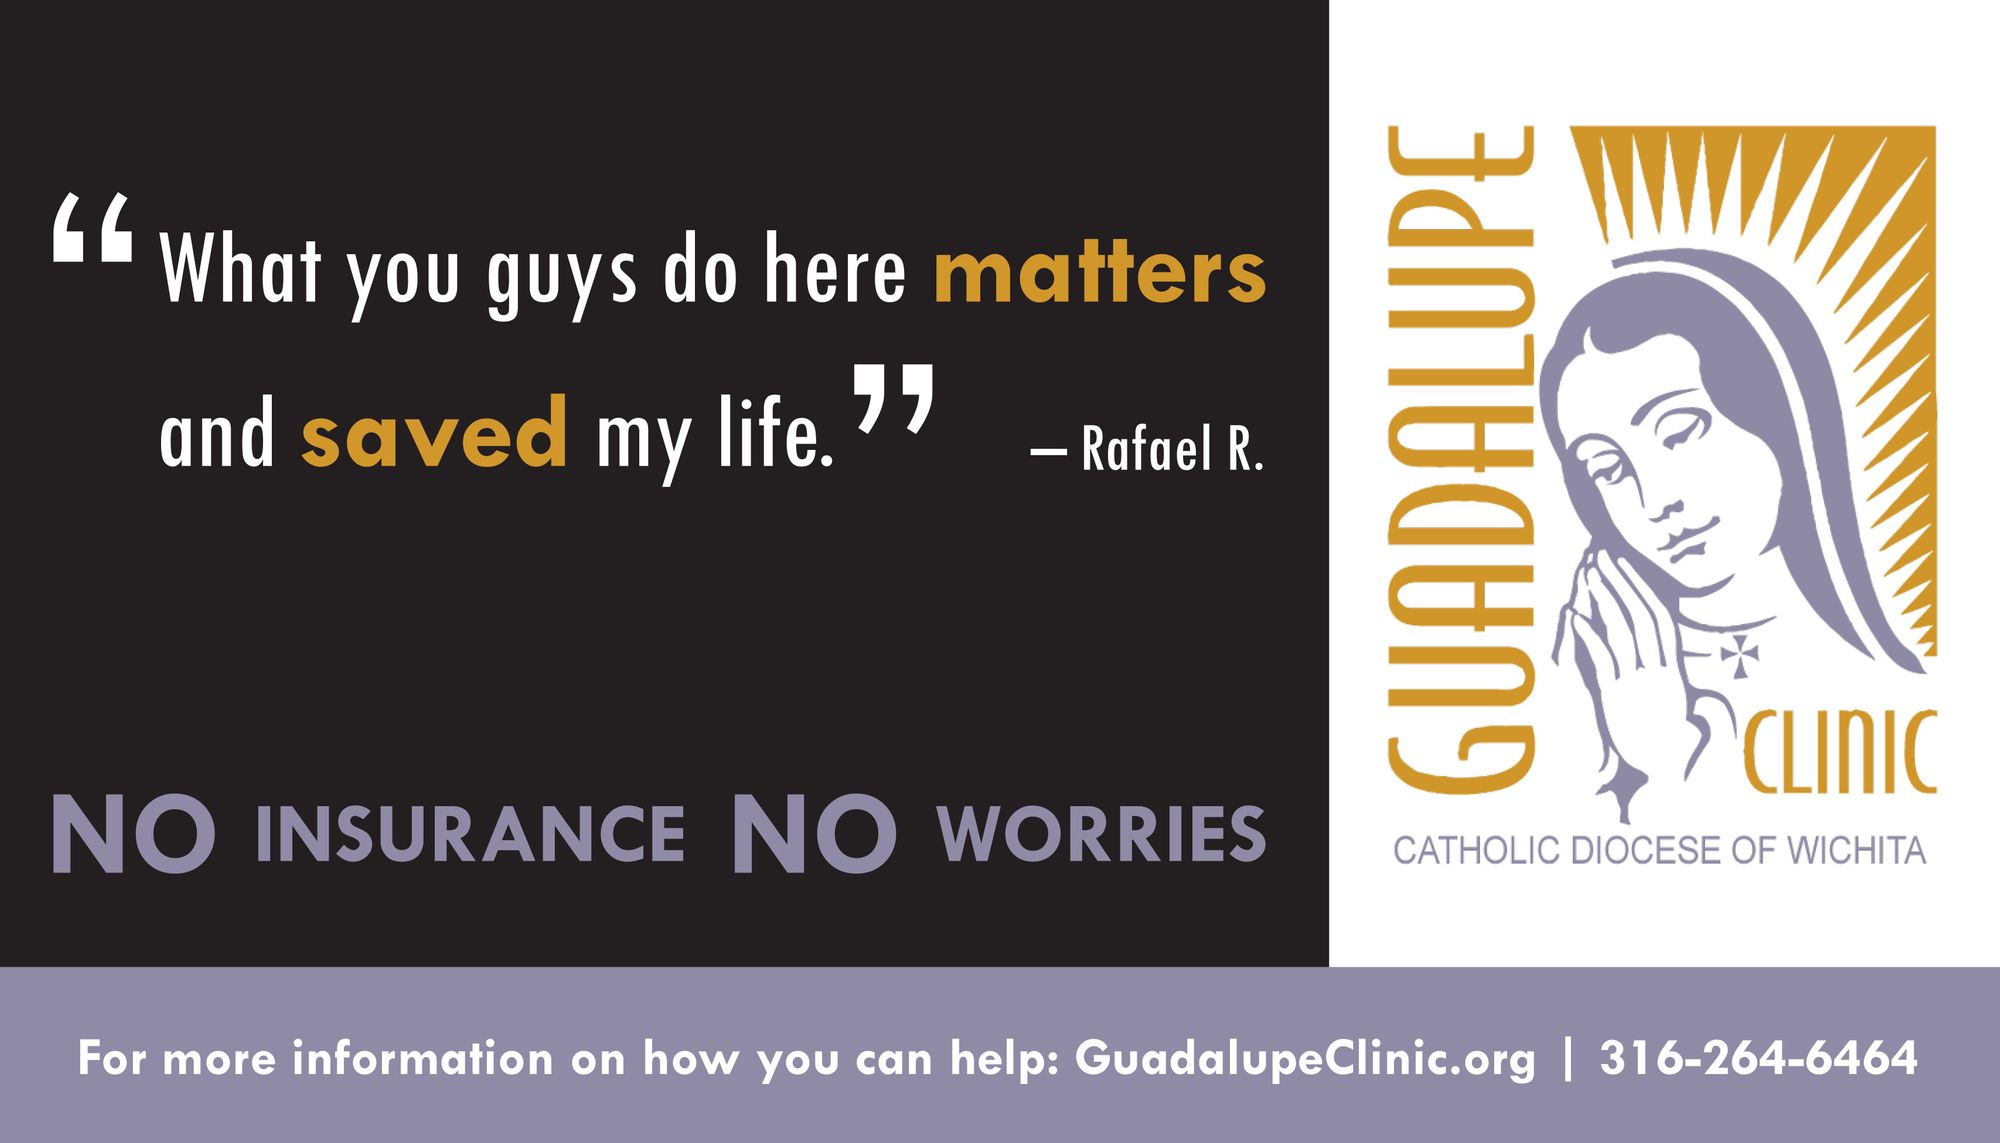 NU students find opportunities to volunteer at the Guadalupe Clinic